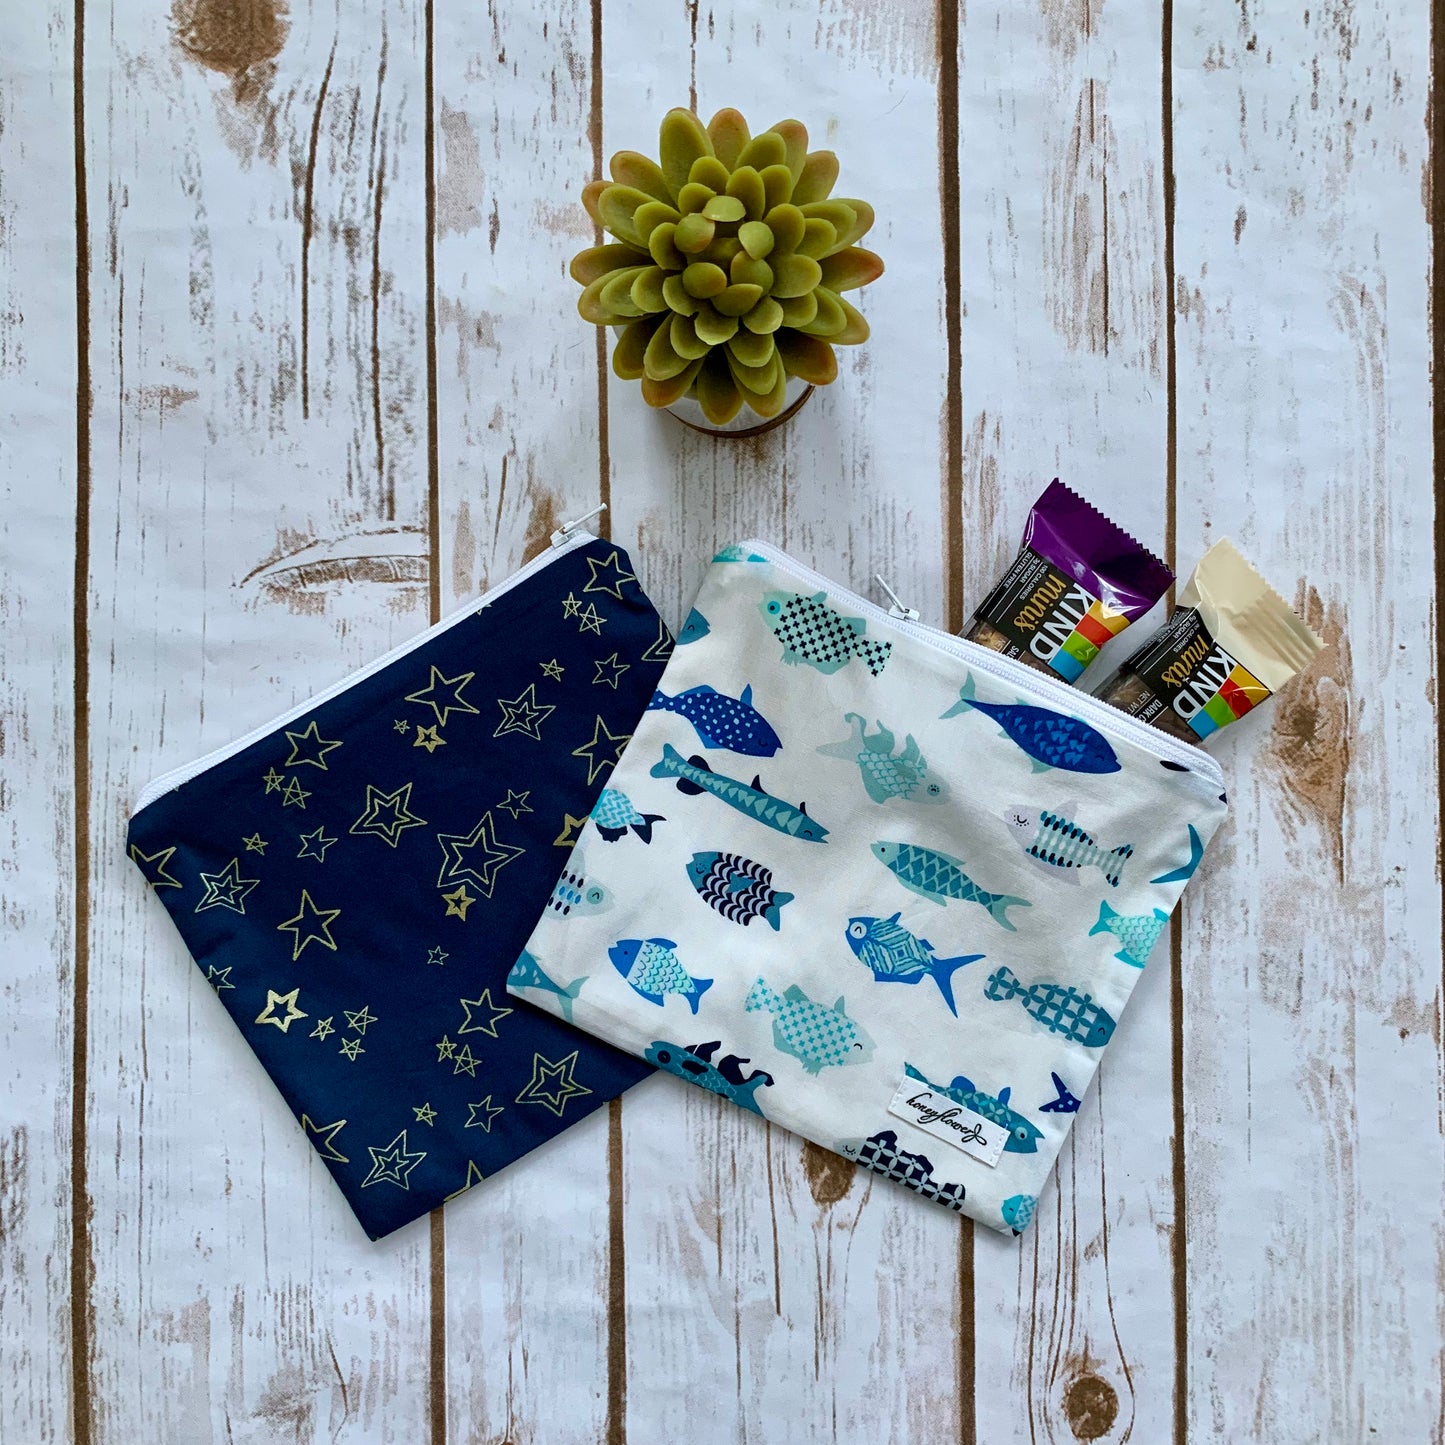 Reusable Snack Pouch | pack of 2 | 100% cotton | choice of nature prints